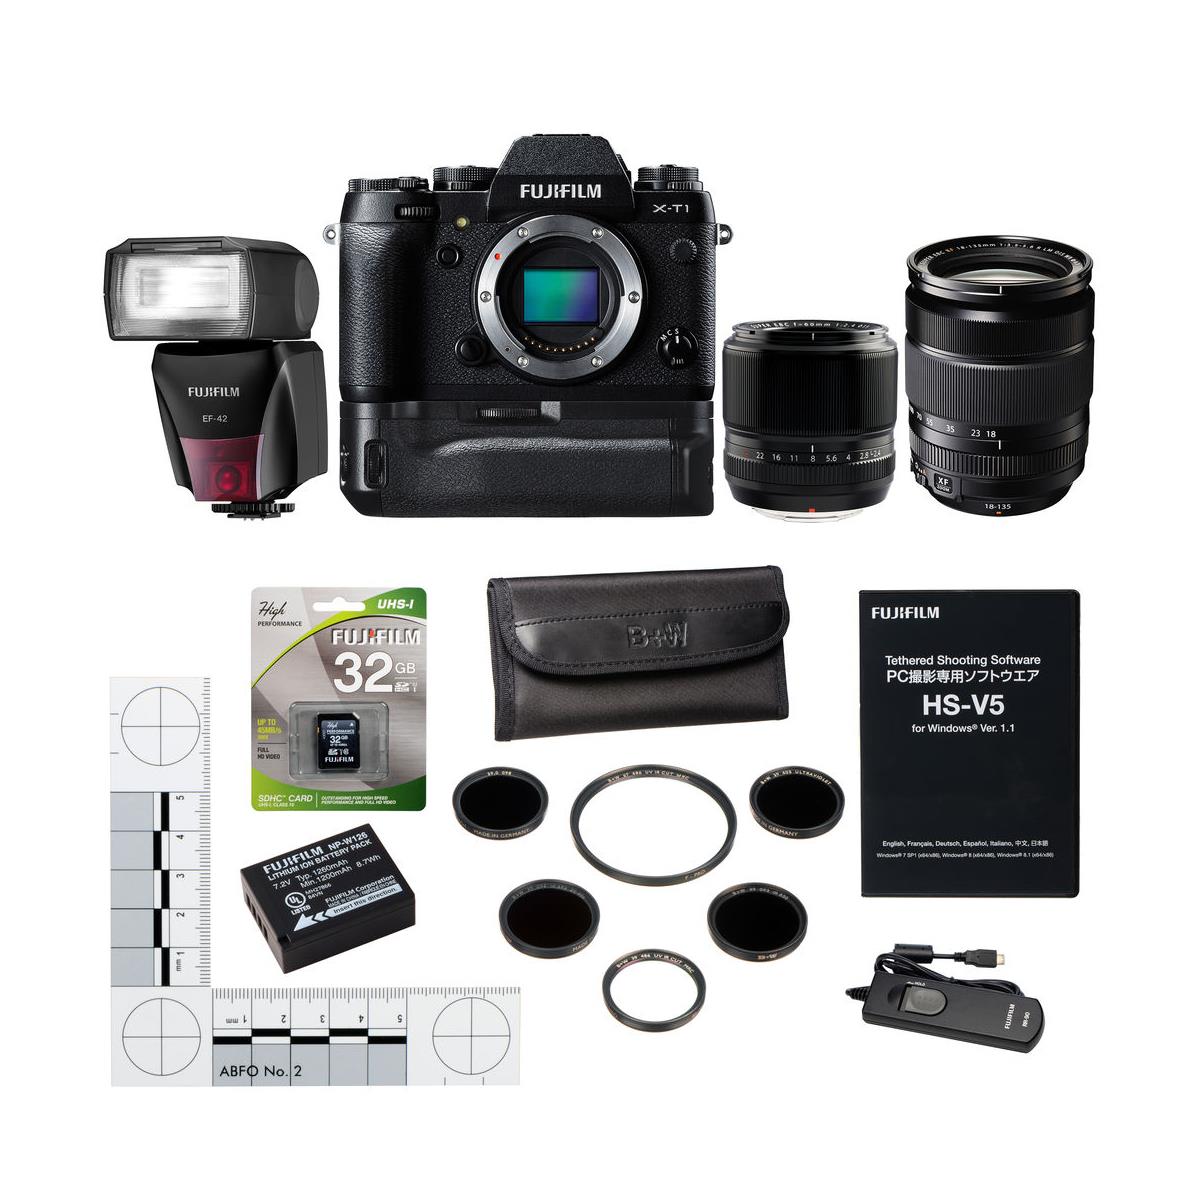 Fujifilm X-T1 IR Infrared Camera  Forensic IR Kit with XF 60mm F2.4 and EF-42 Shoe Mount Flash